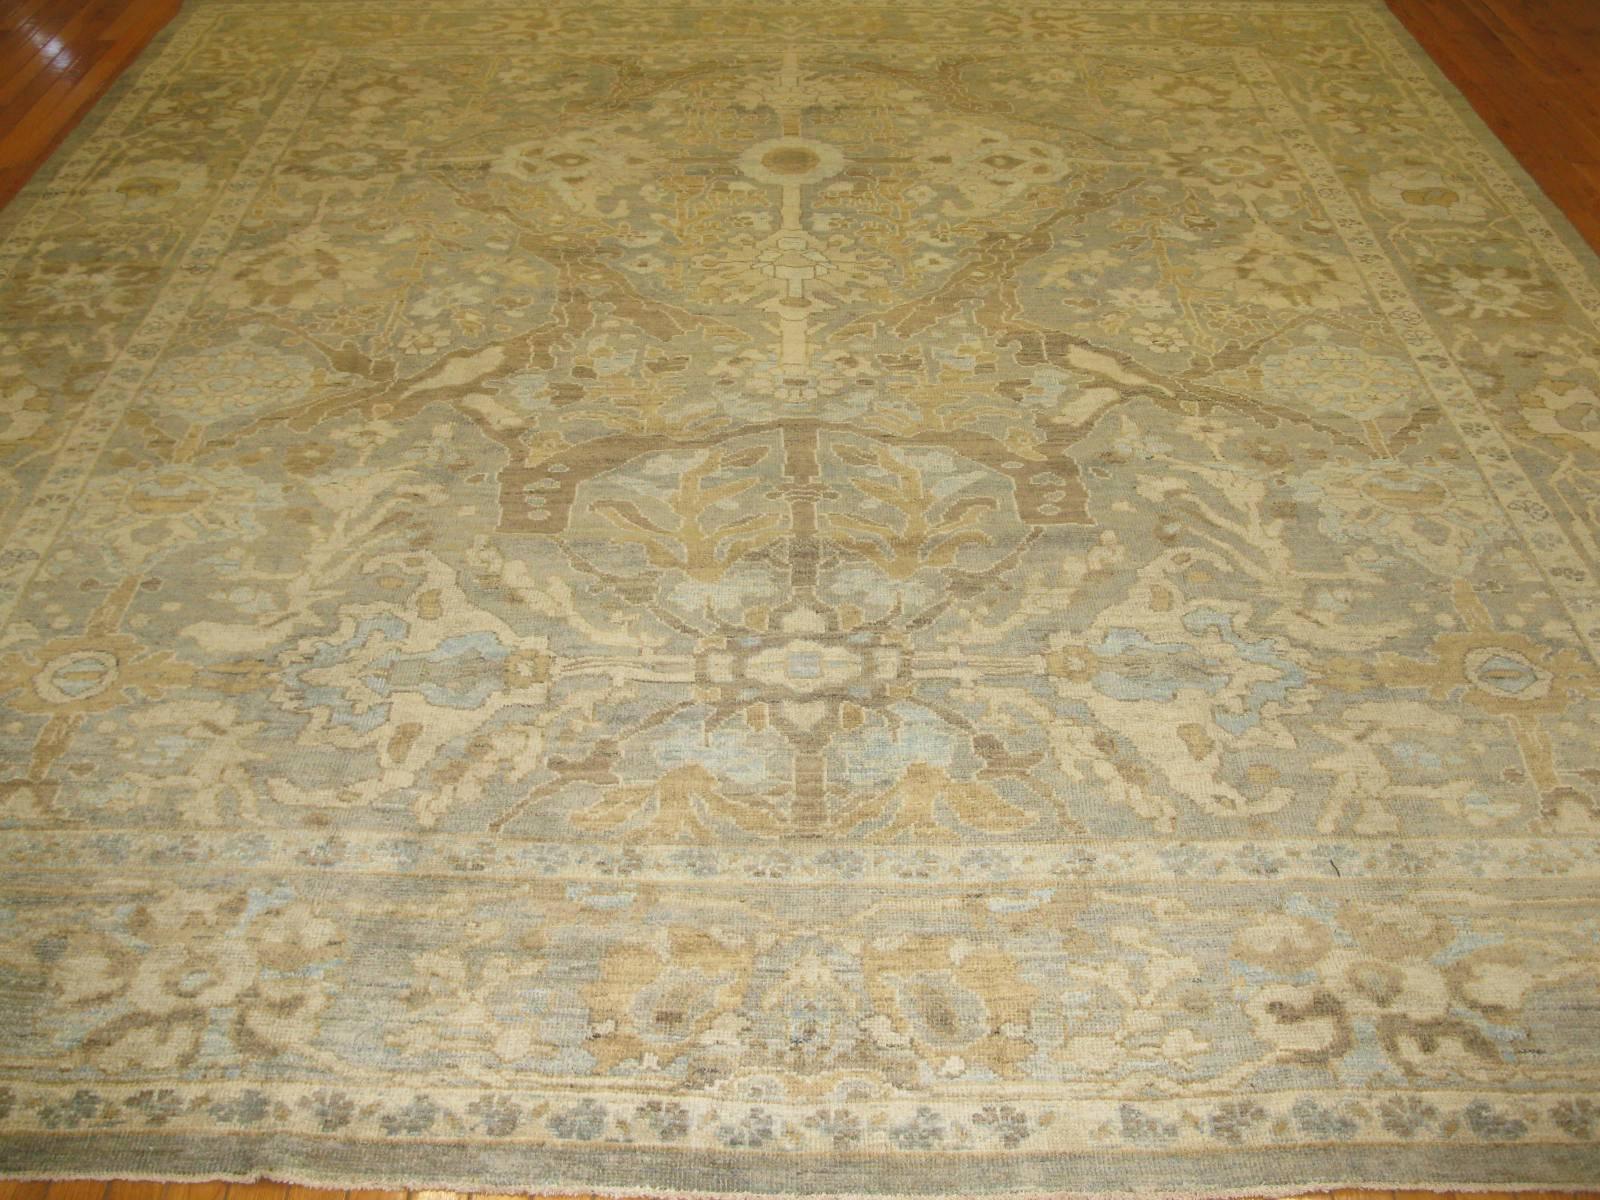 This is a fabulous contemporary hand-knotted rug is made in the spirit of the original antique Persian Sultanabad rugs. The rug is made with wool colored with natural dyes and textures to capture the patina of the antique rugs. The rug measures 10'